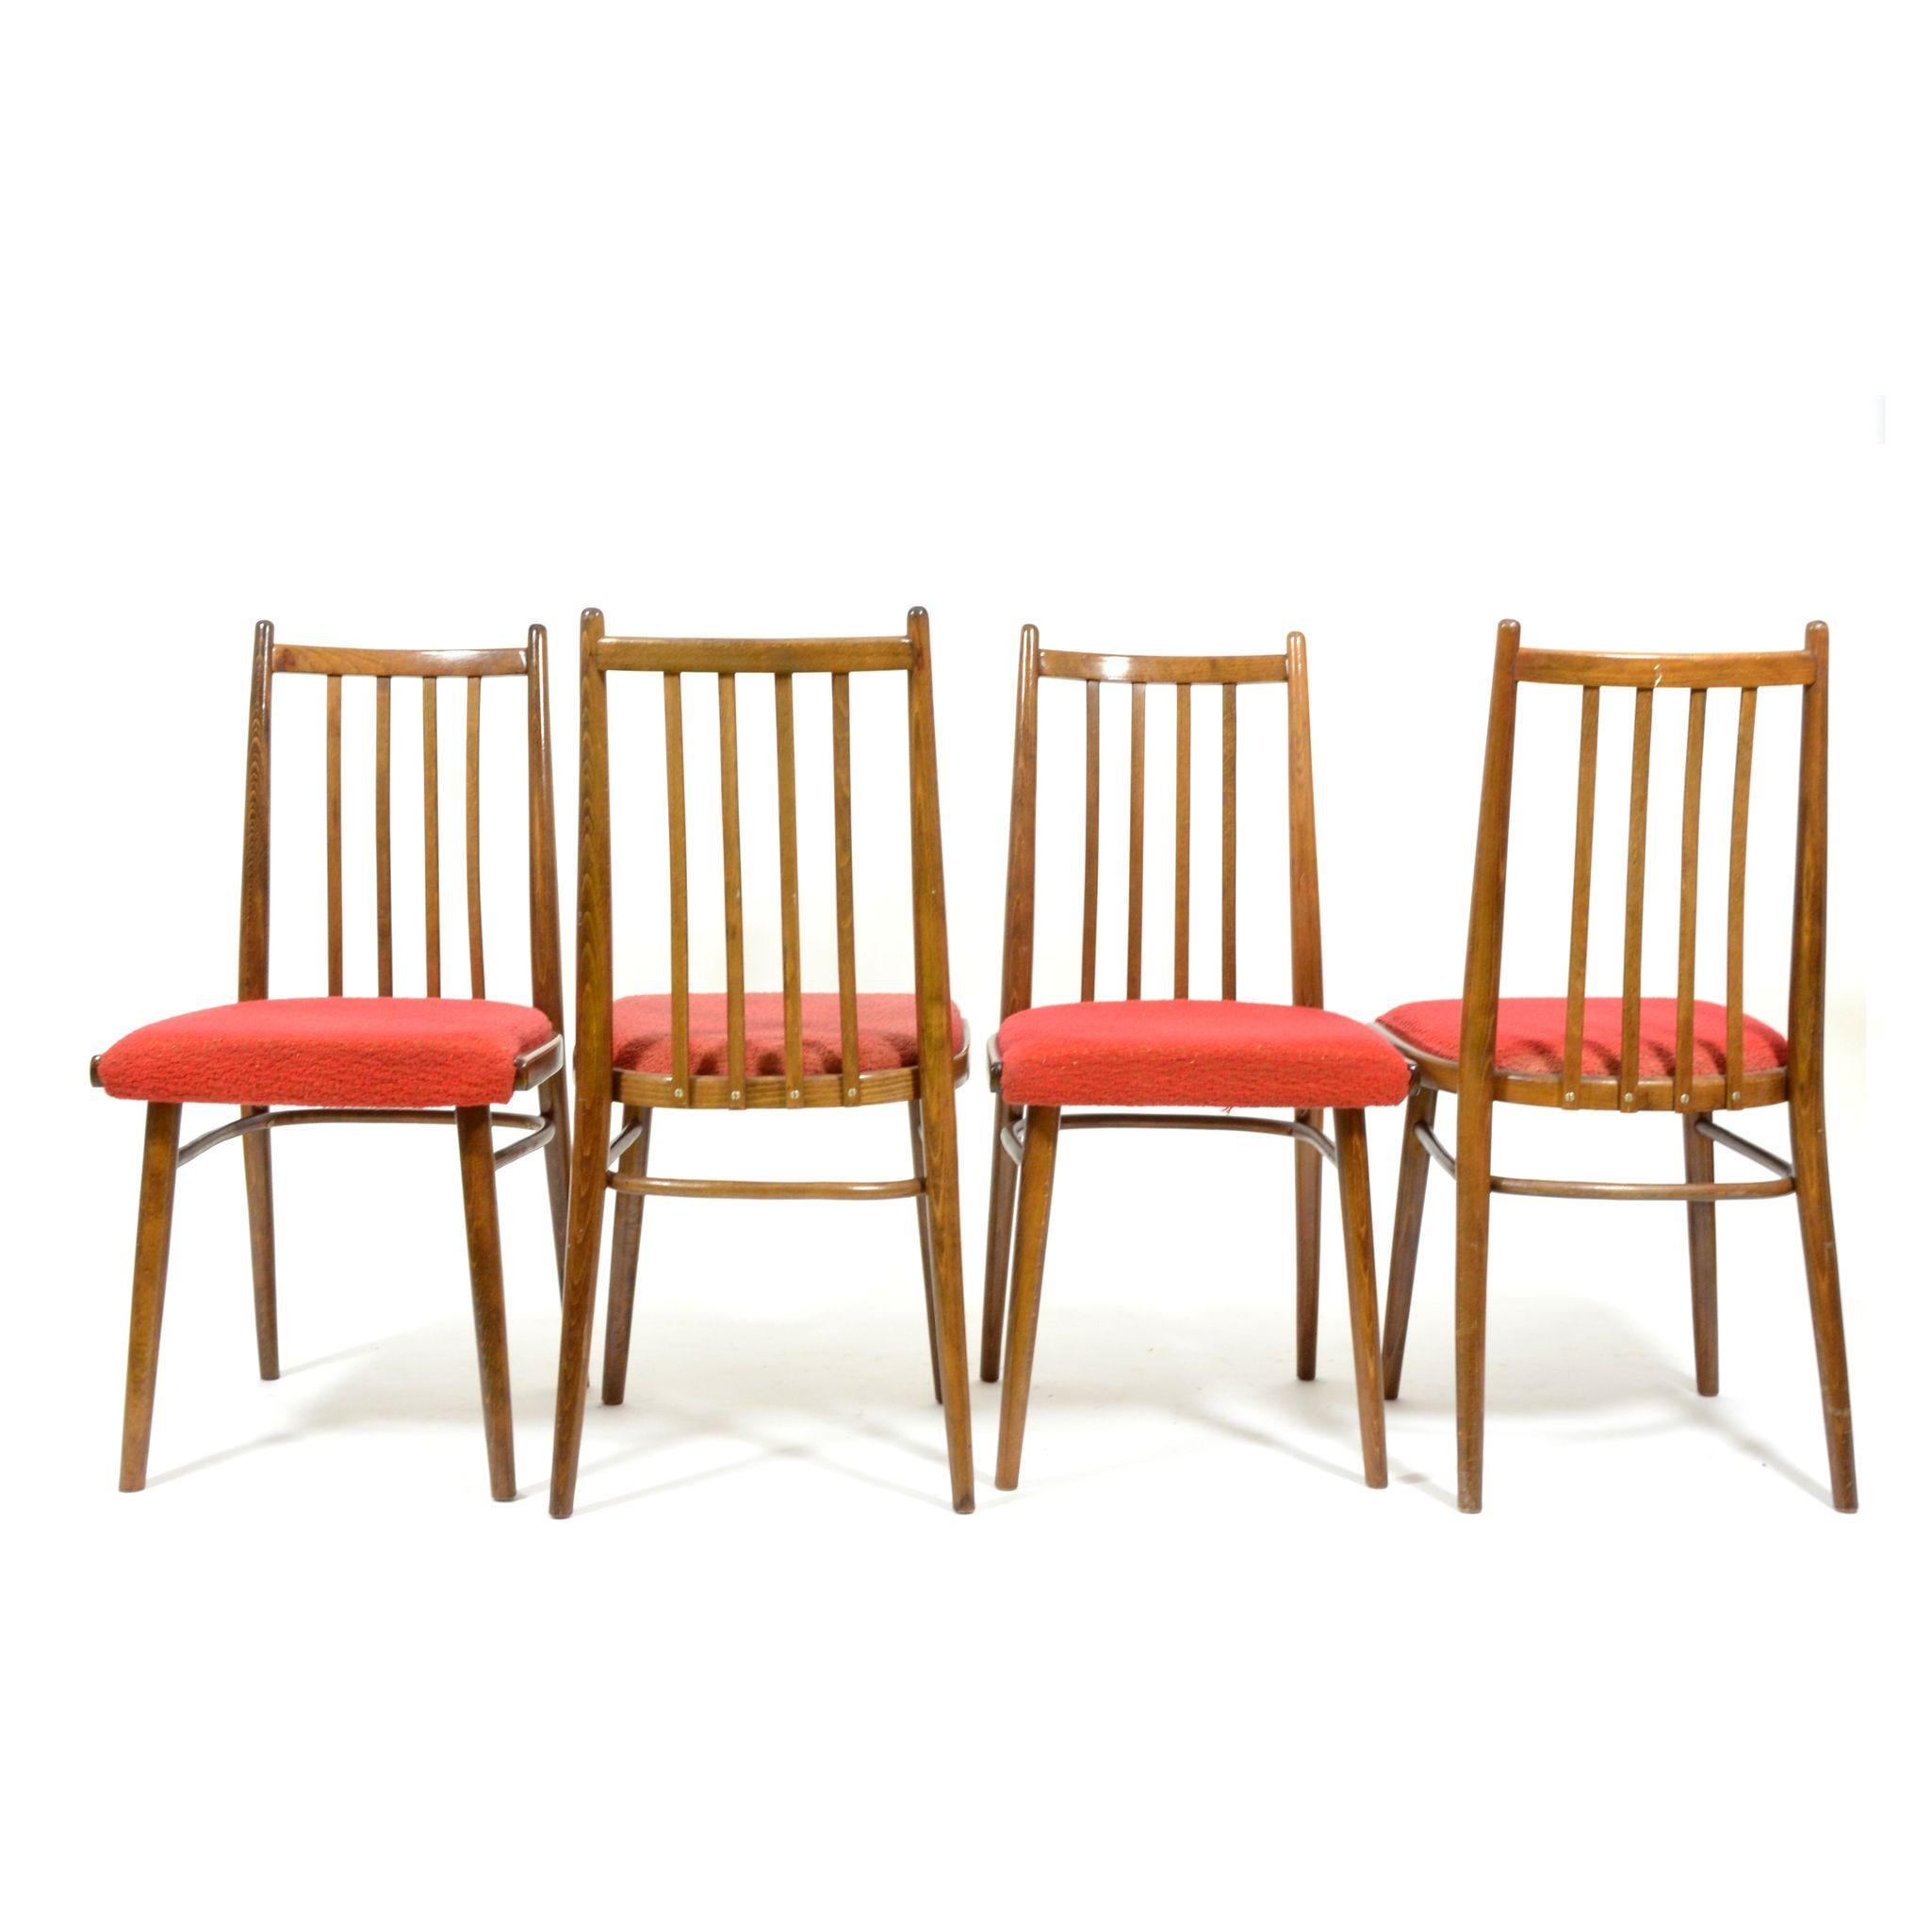 Set of Four Vintage Dining Chairs, Red Upholstered, Czechoslovakia, 1970s For Sale 2